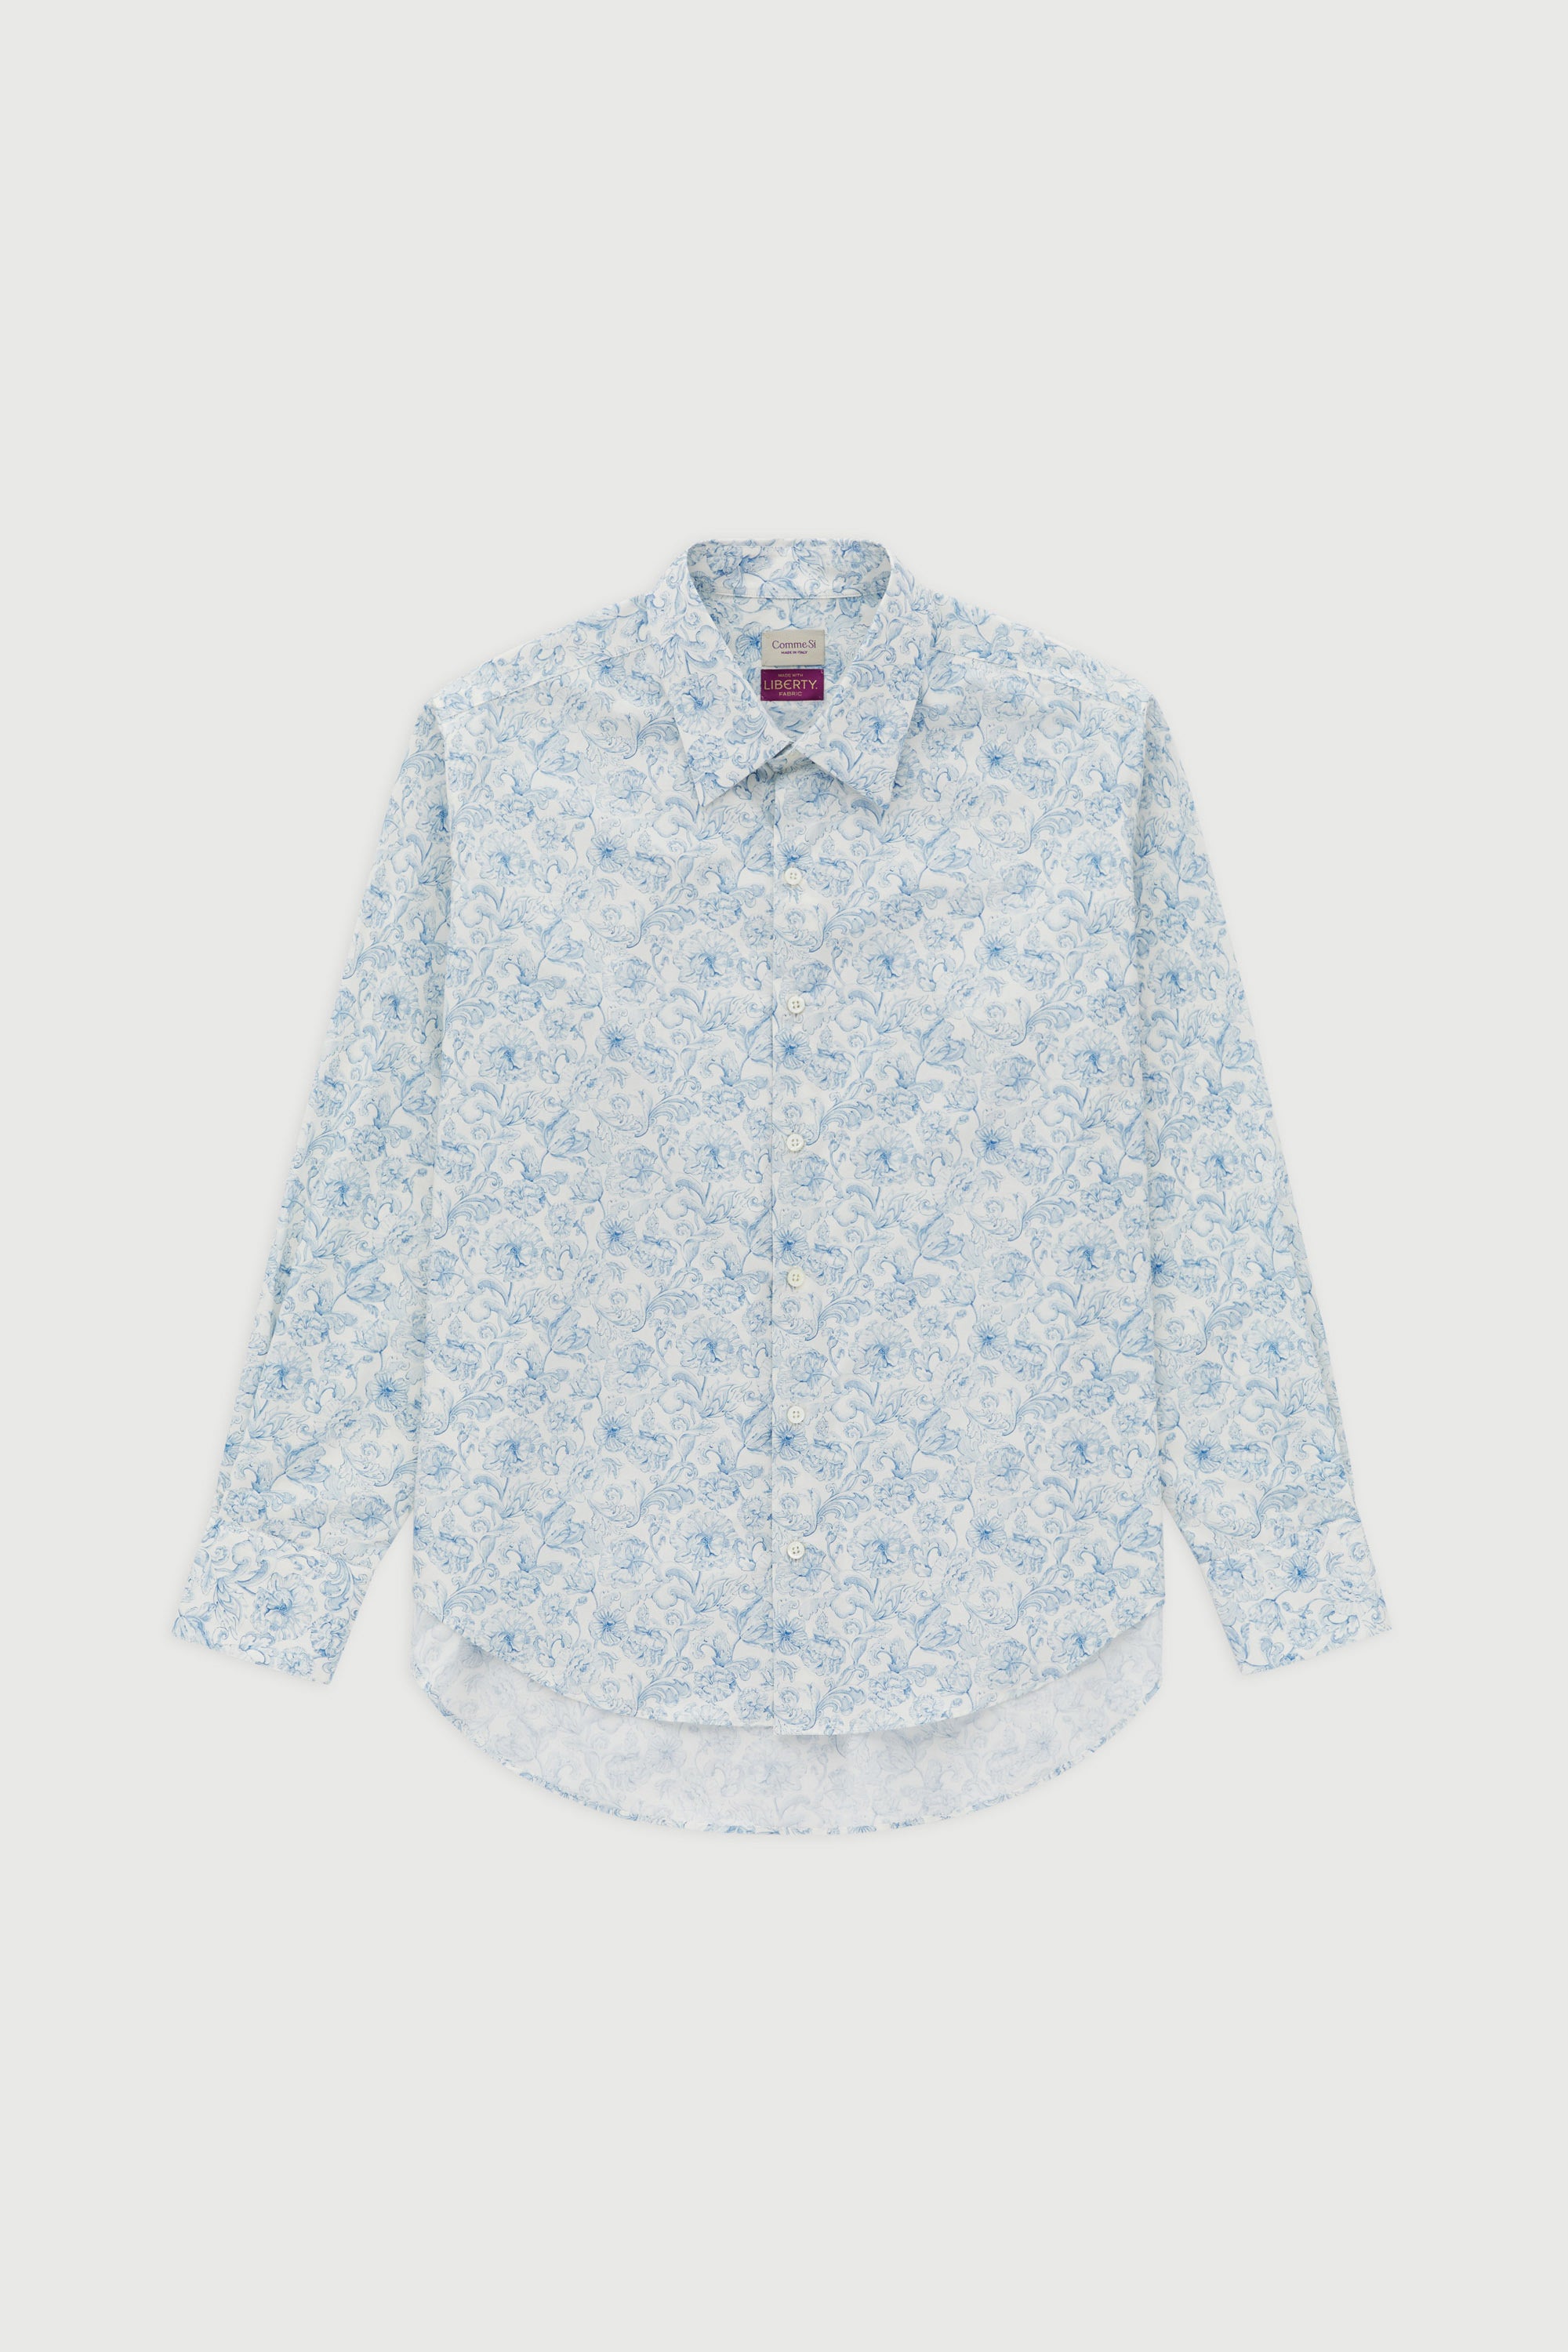 La Shirt Classica, made with Liberty fabric